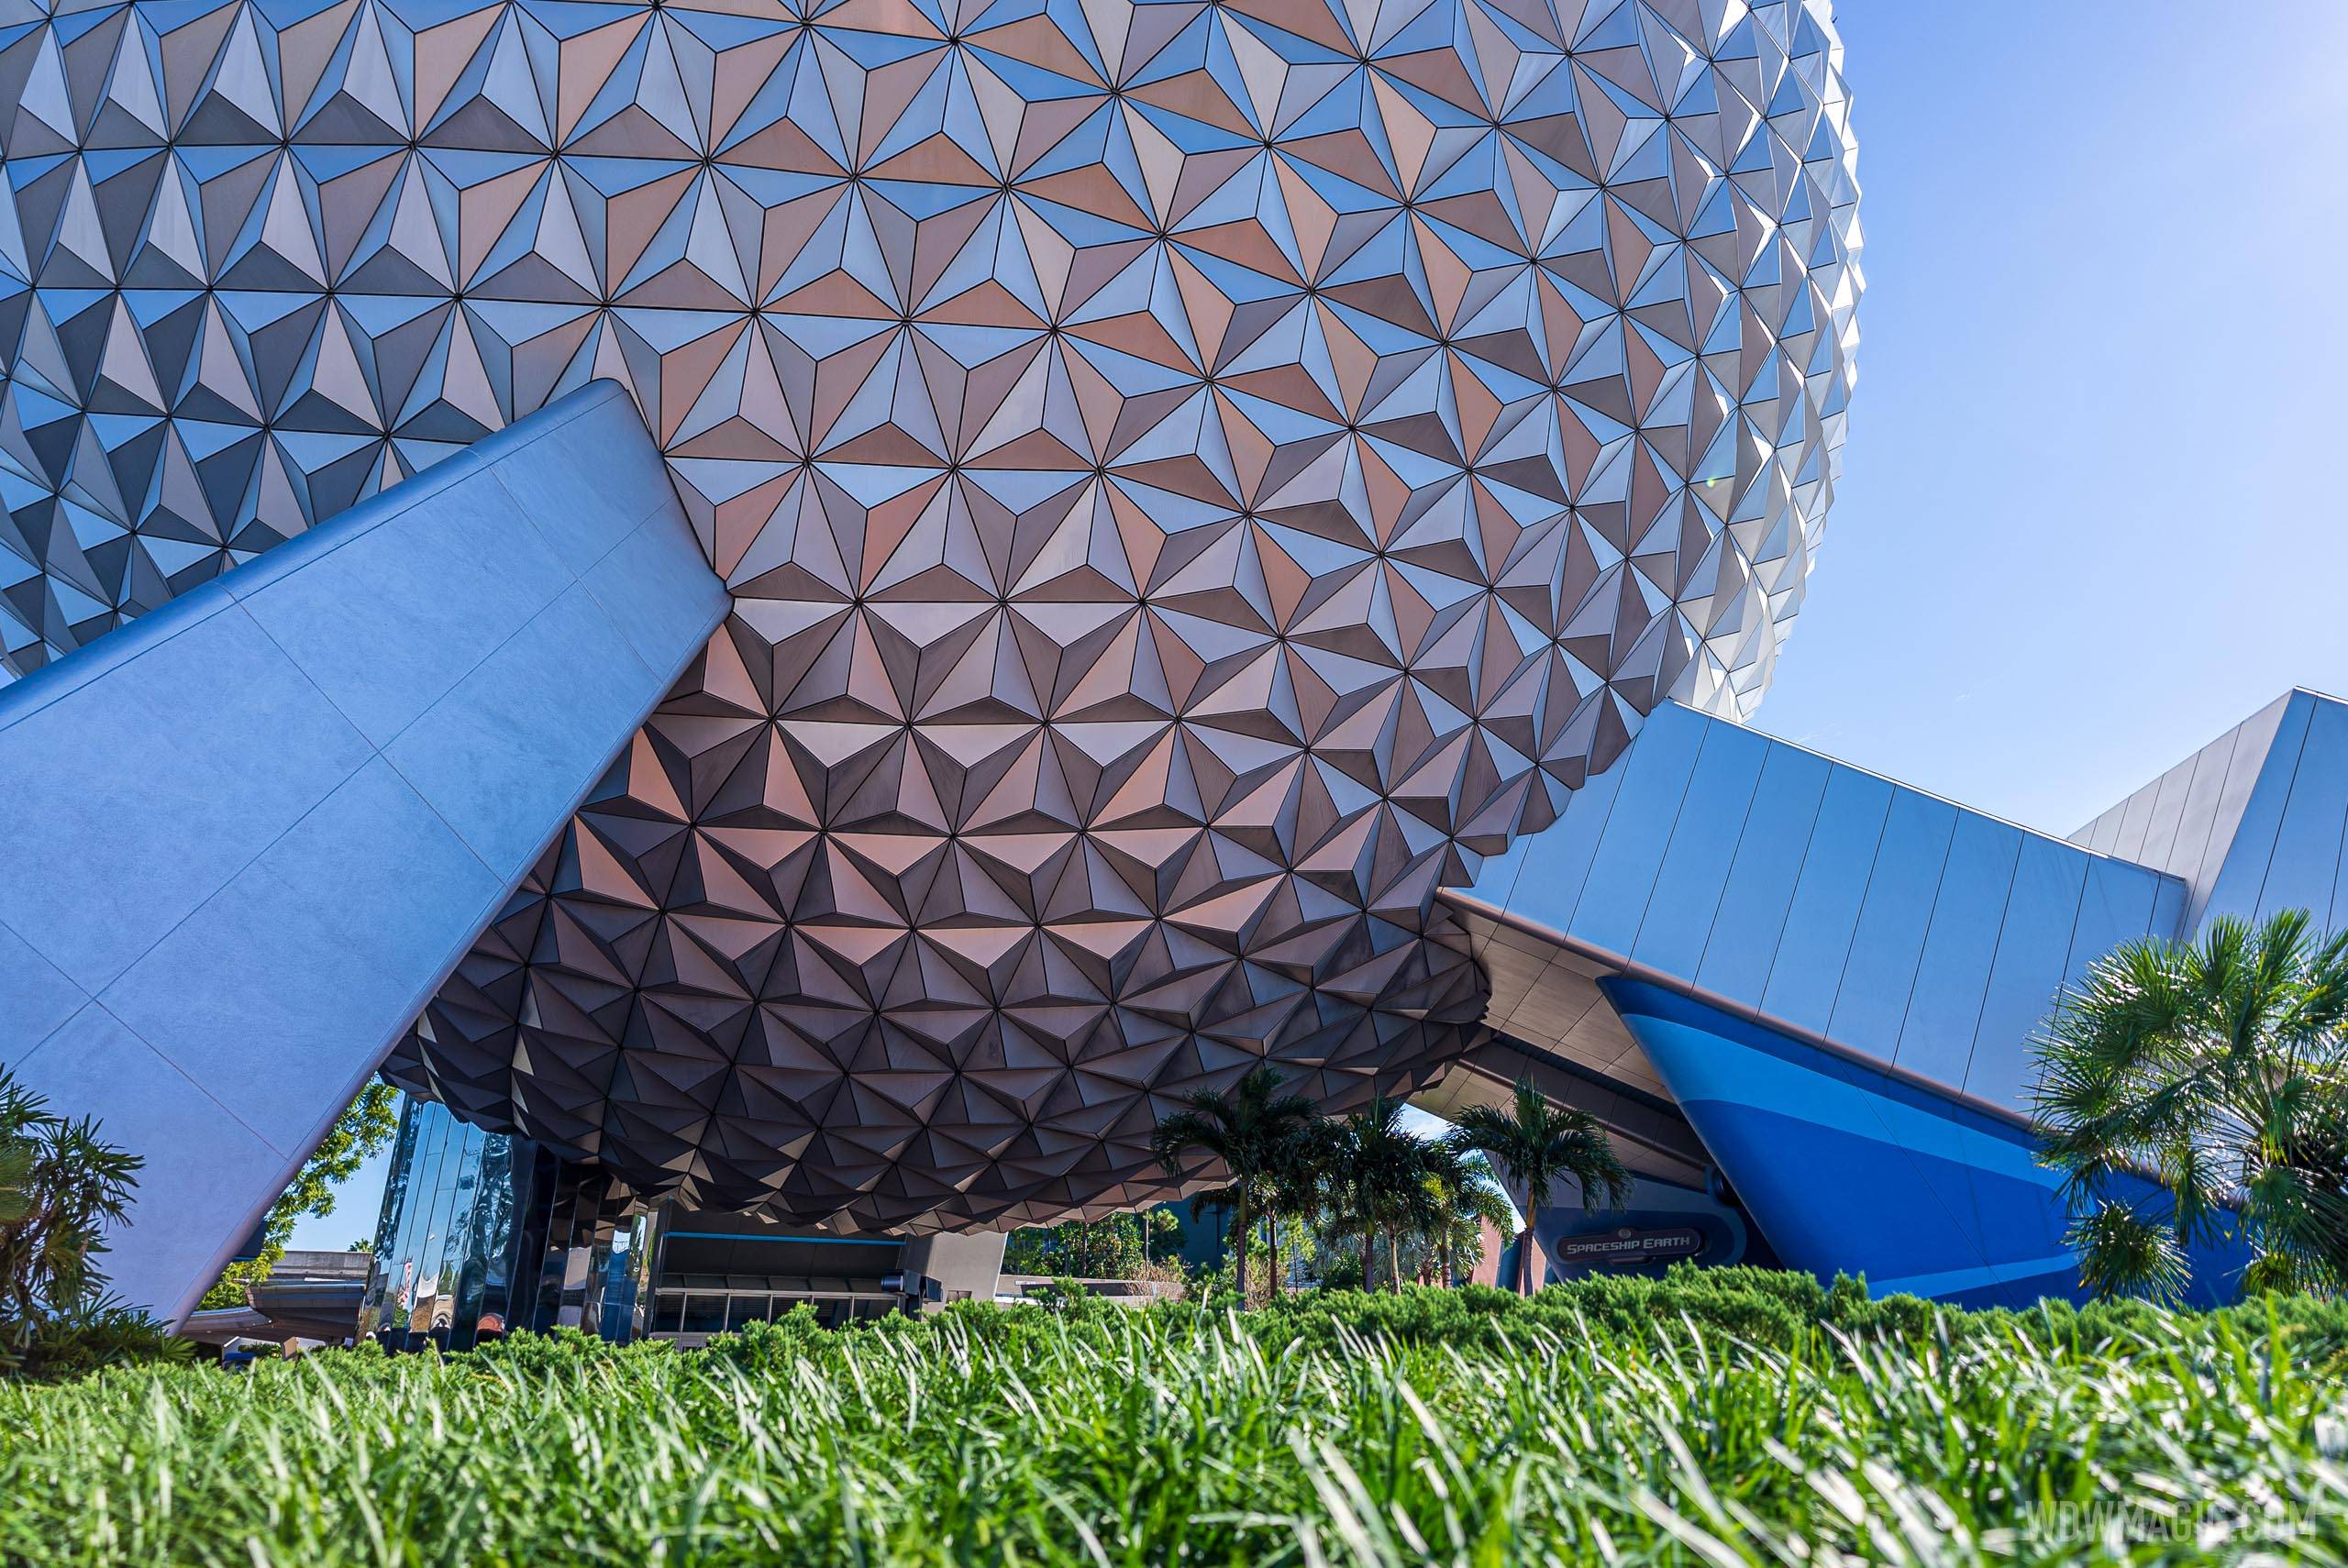 Spaceship Earth changes